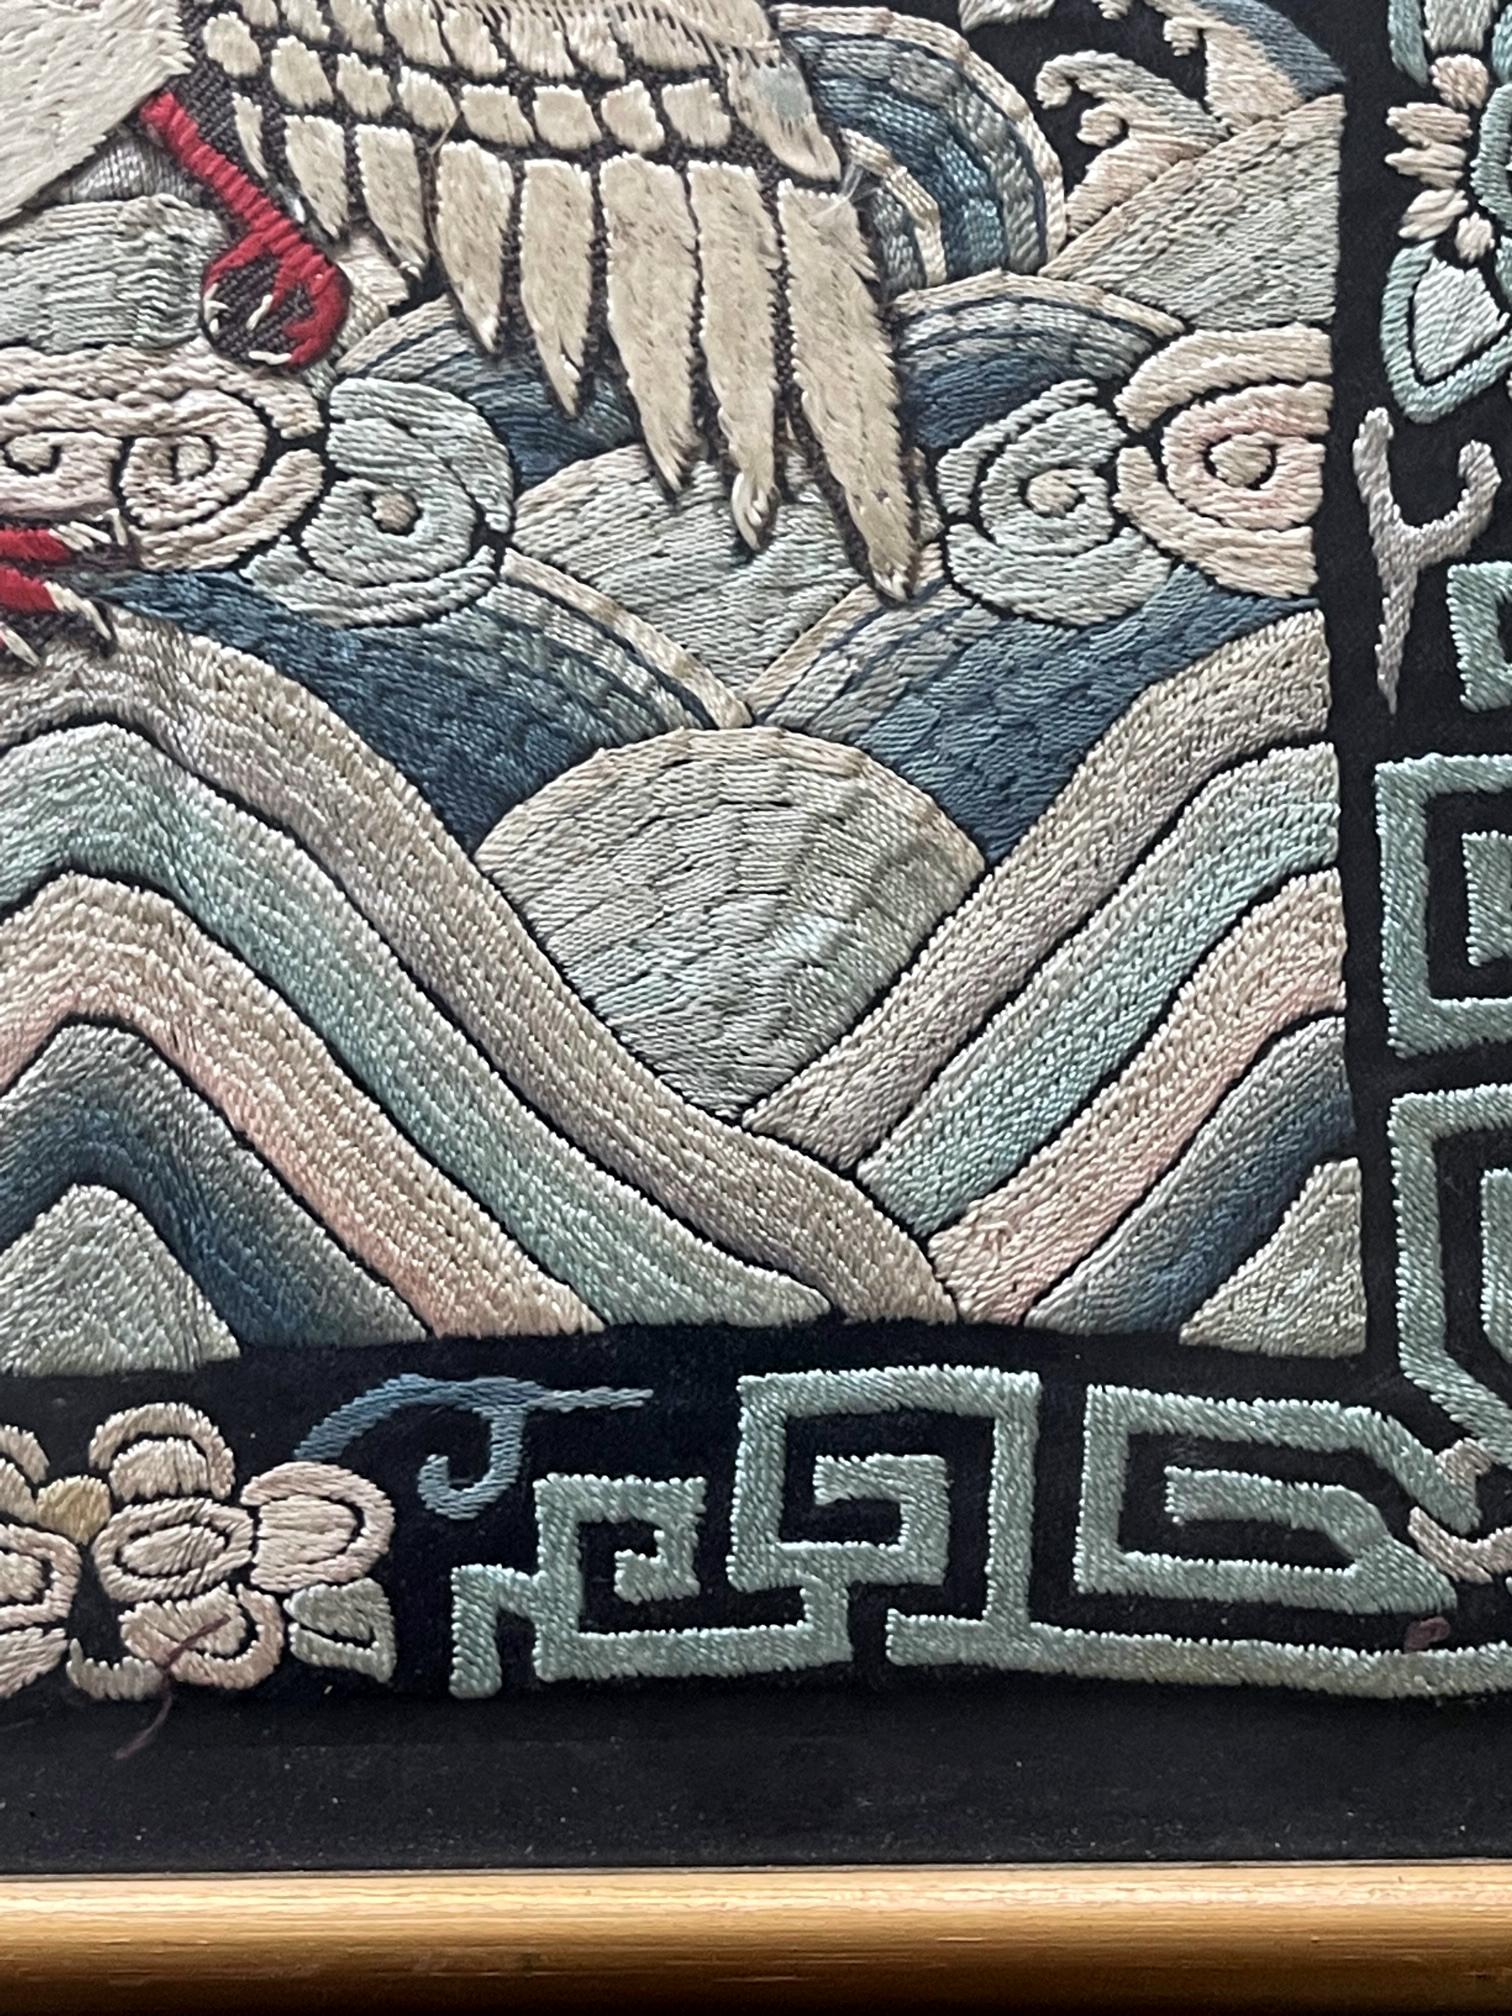 qing dynasty official ranks